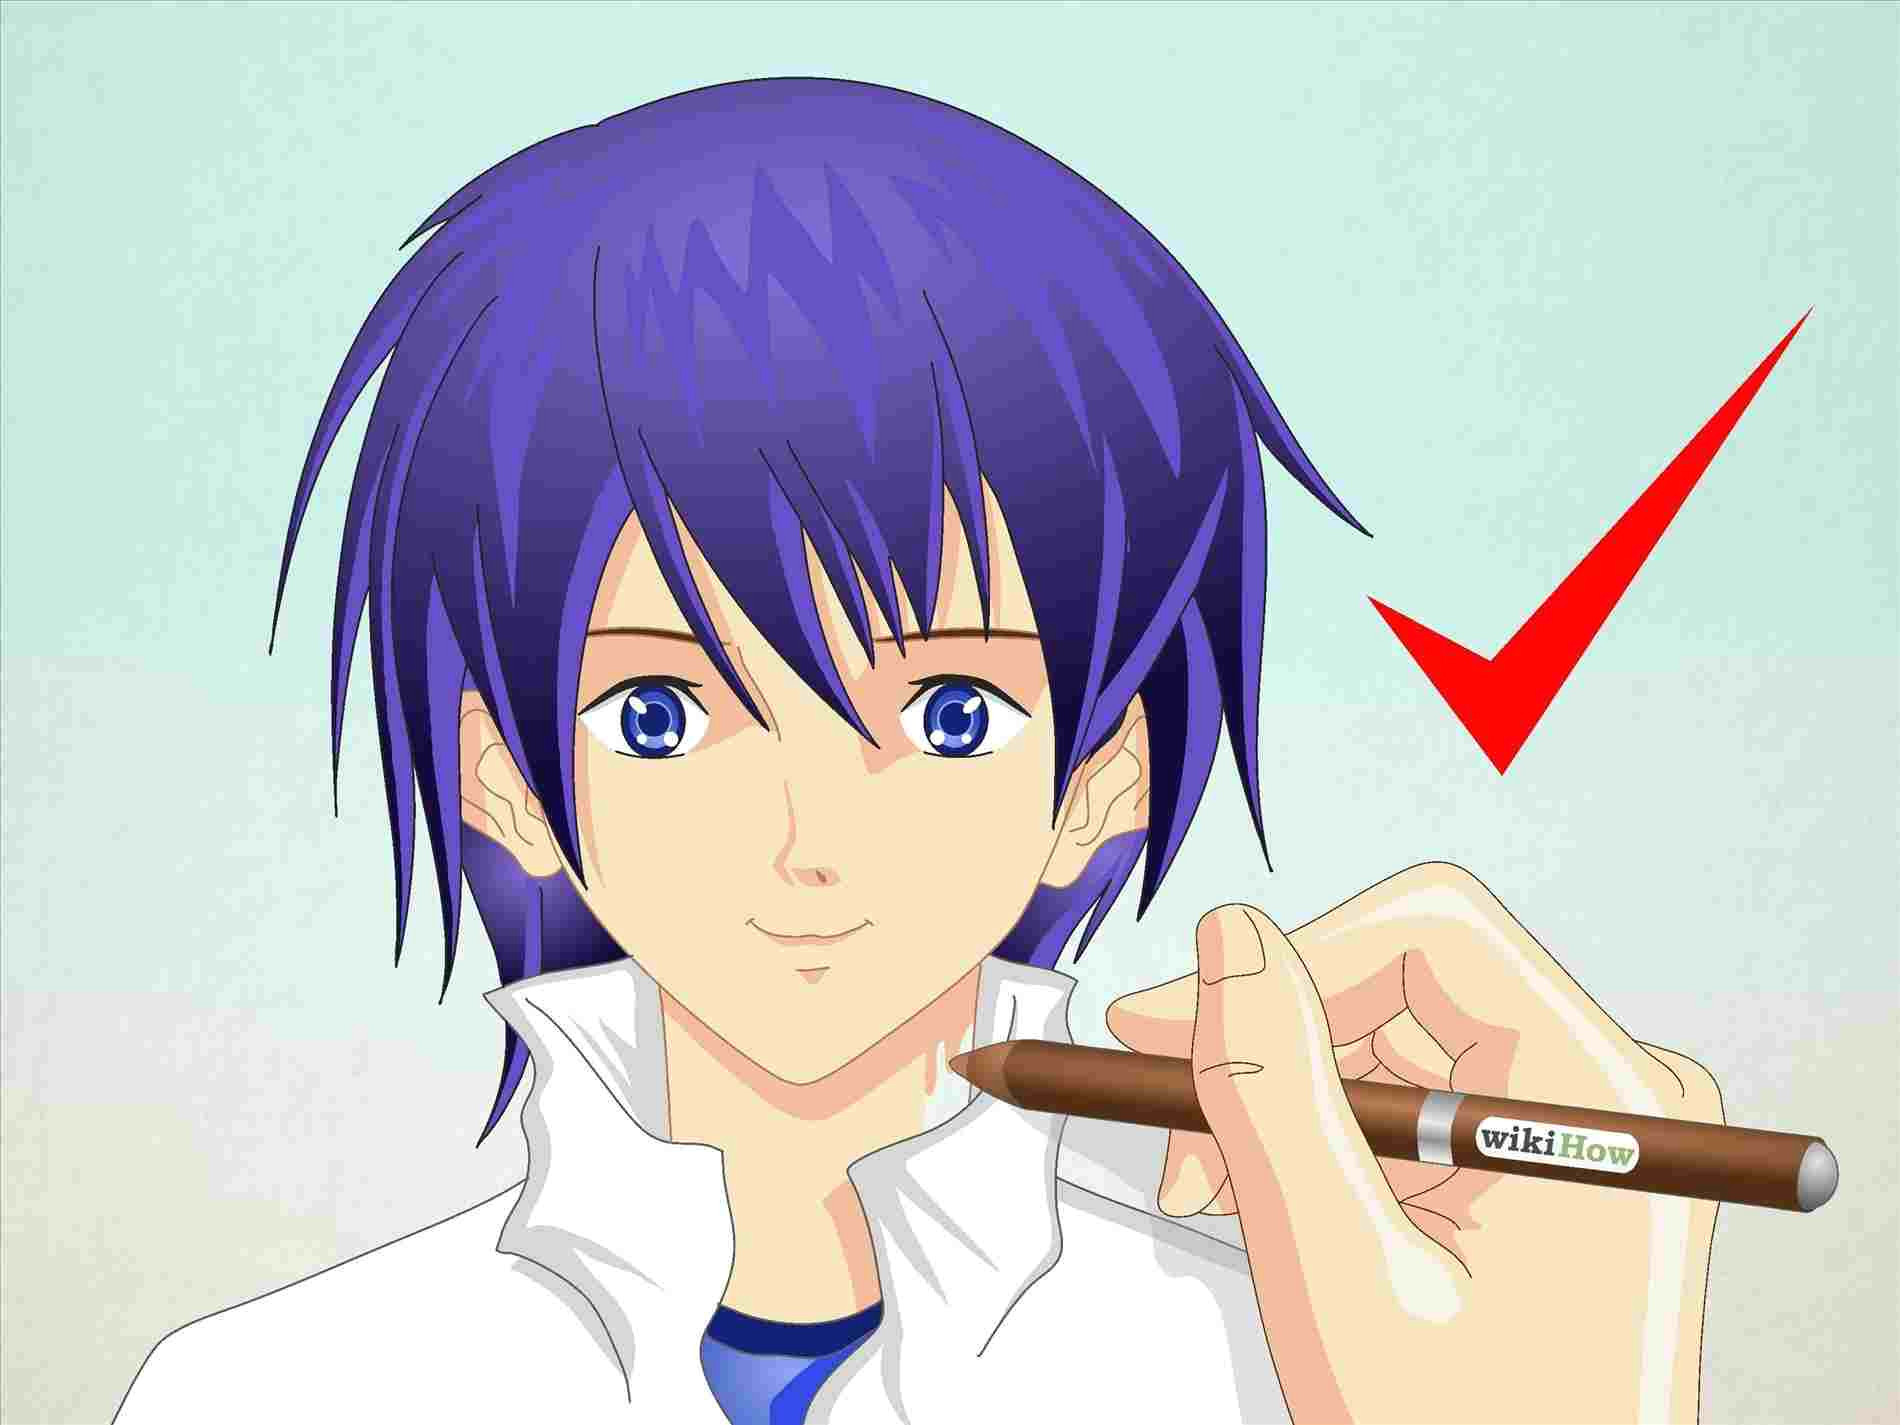 How to Draw A Cute Anime Boy Drawing Od Cute Male Anime Men to Draw A Chibi Boy with